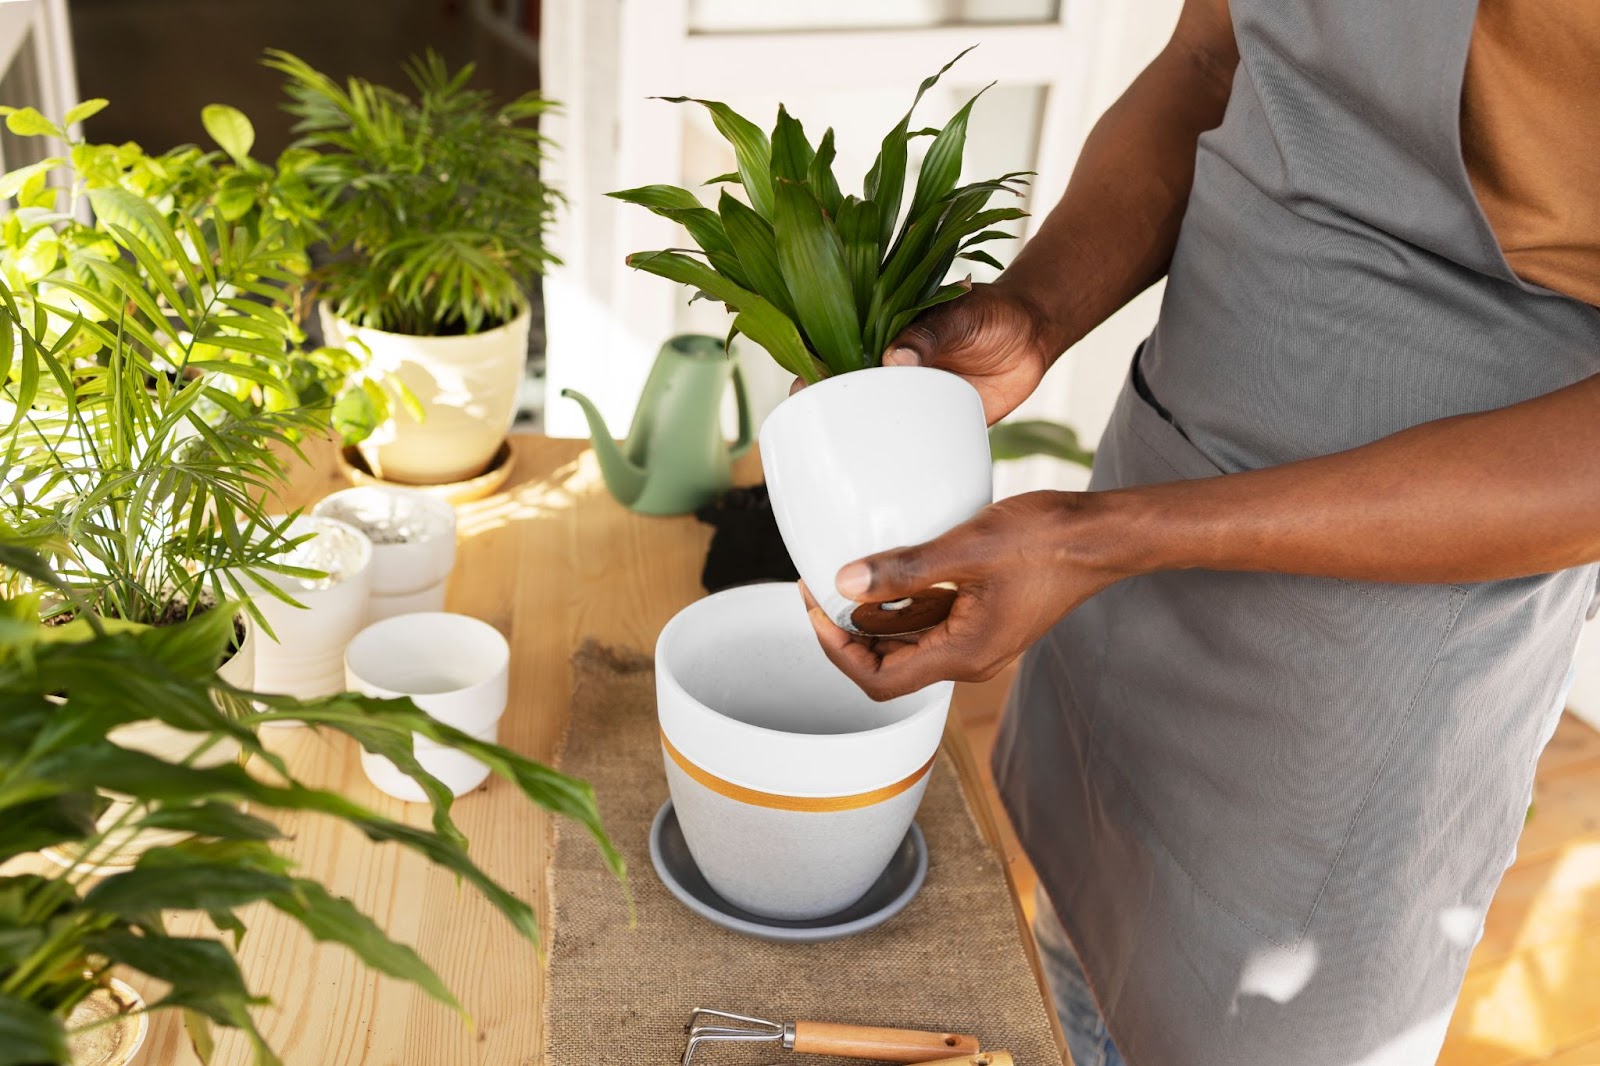 How to Care and Maintain for Your Ceramic Planters